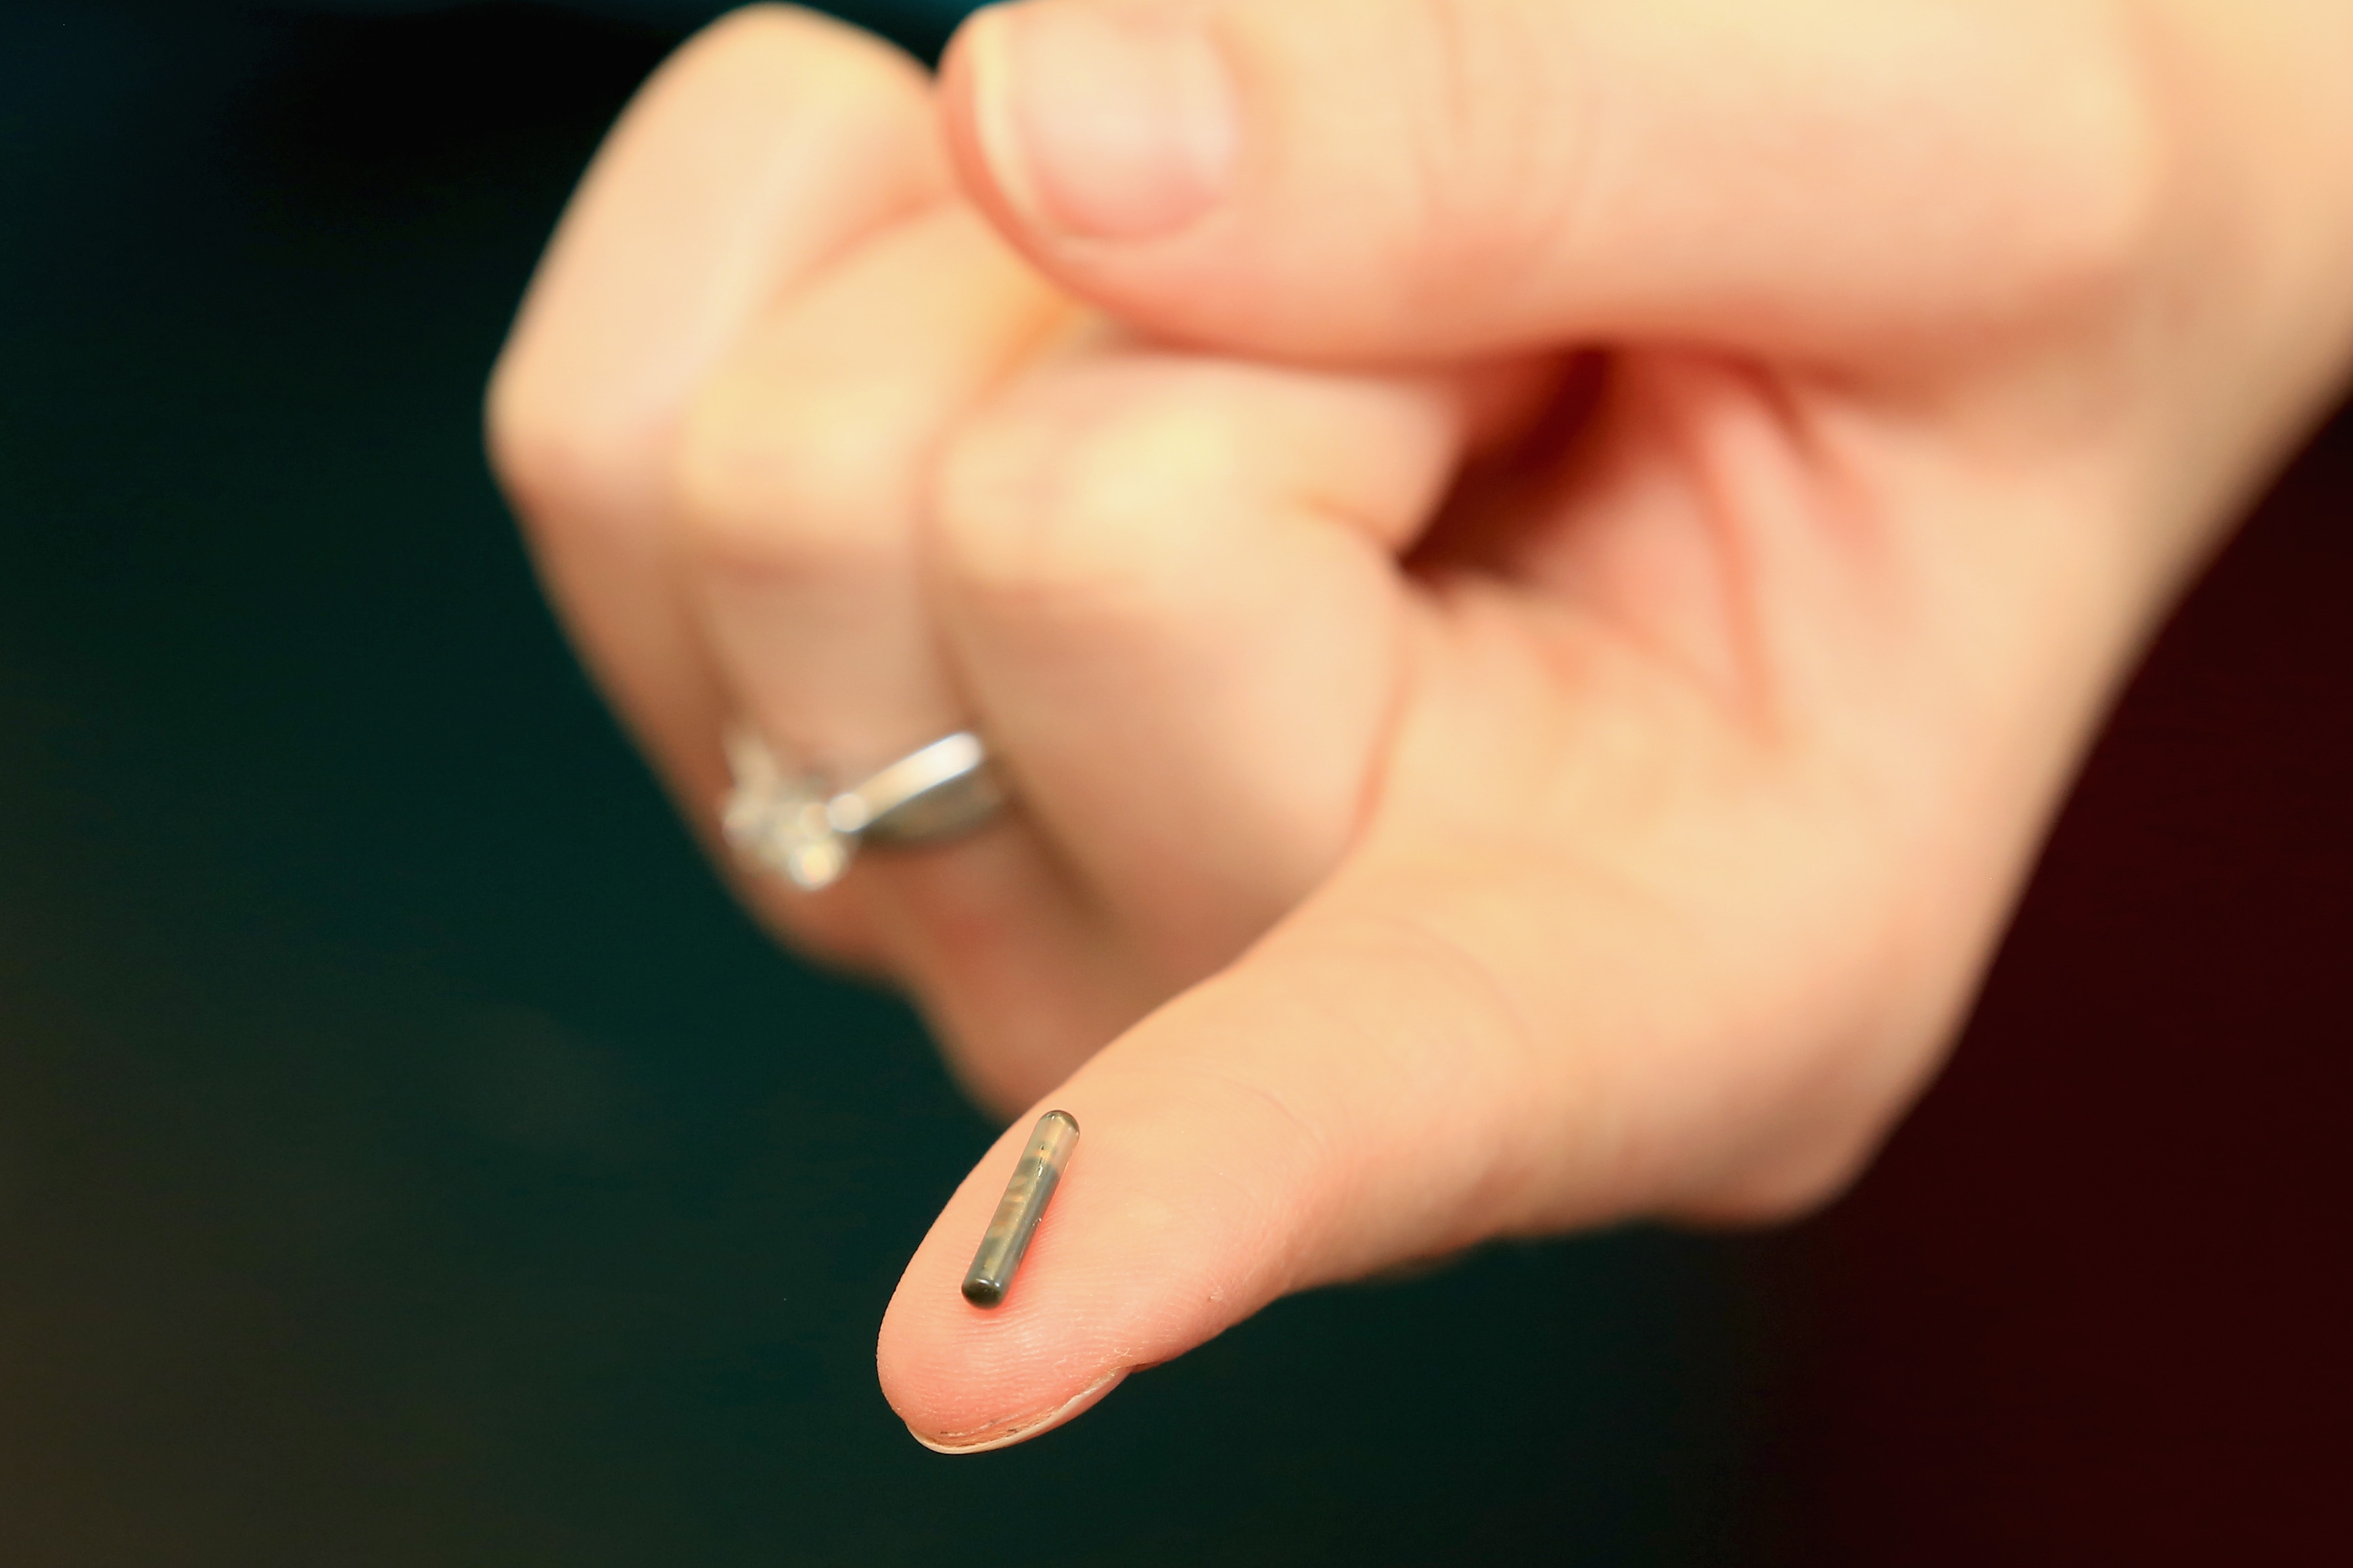 Sweden begins microchipping residents—access to id, wallet and keys is now underneath the skin